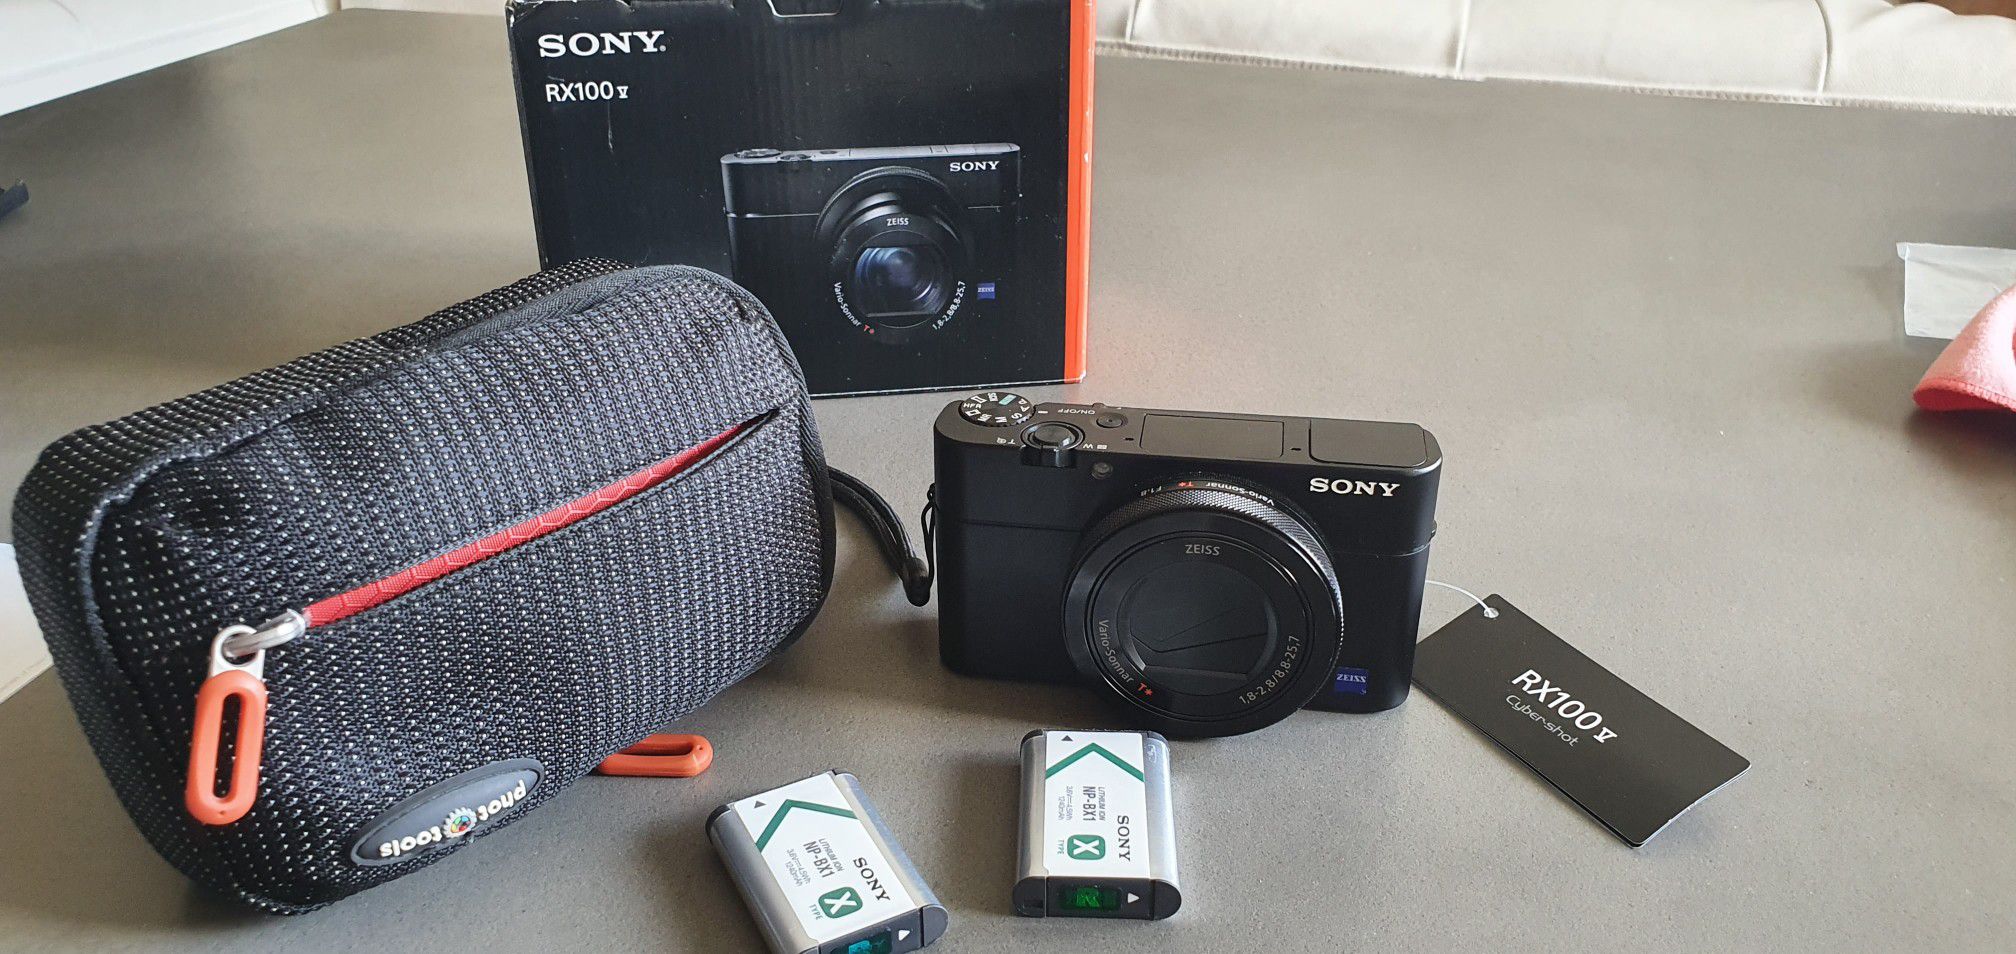 Sony RX100 V amazing conditions! With 2 batteries, pouch, and original Box.